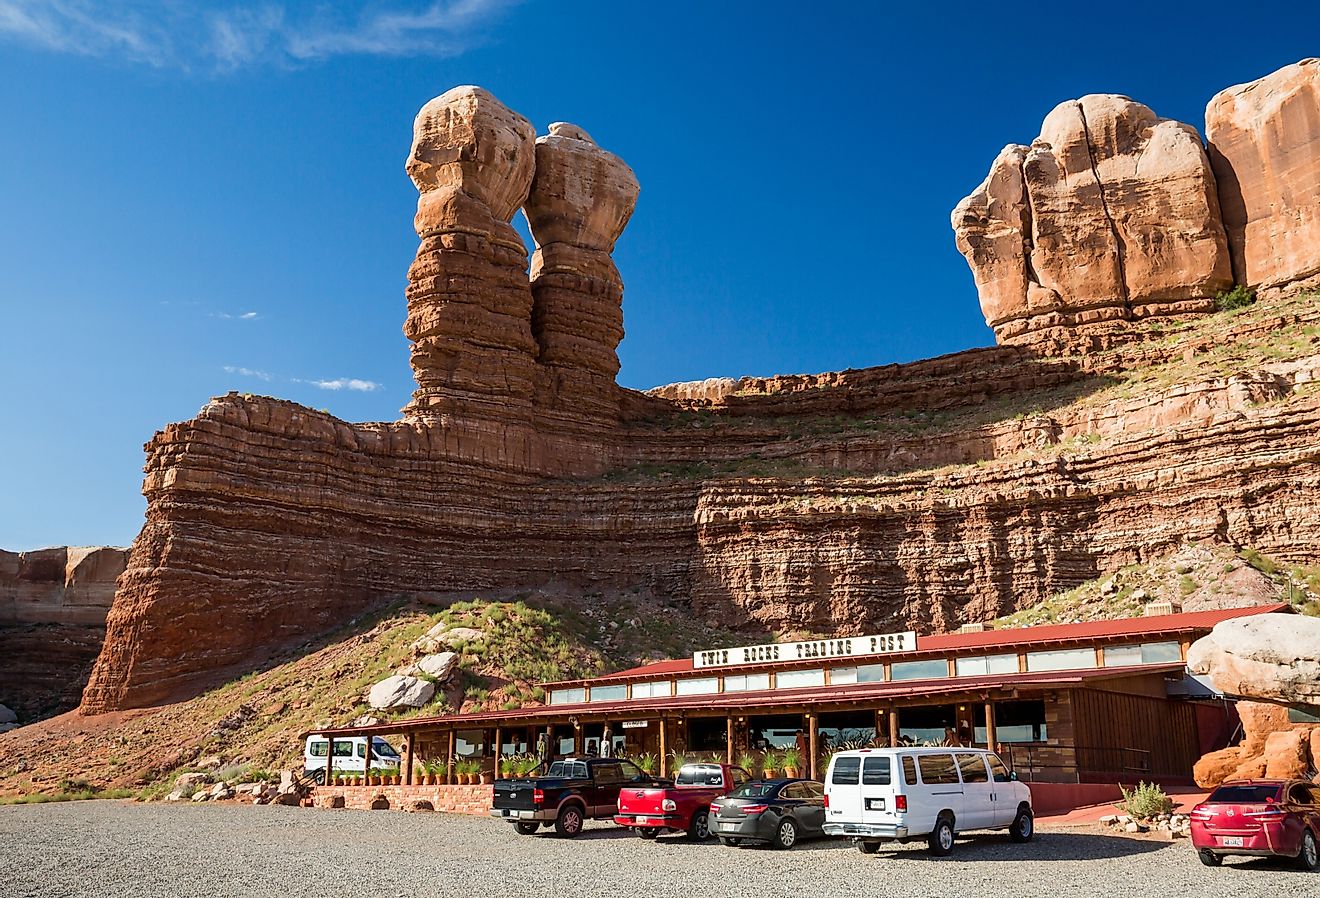 Stone formation called Twin Rocks and the Twin Rocks Cafe in Bluff, Utah. Image credit Oscity via Shutterstock